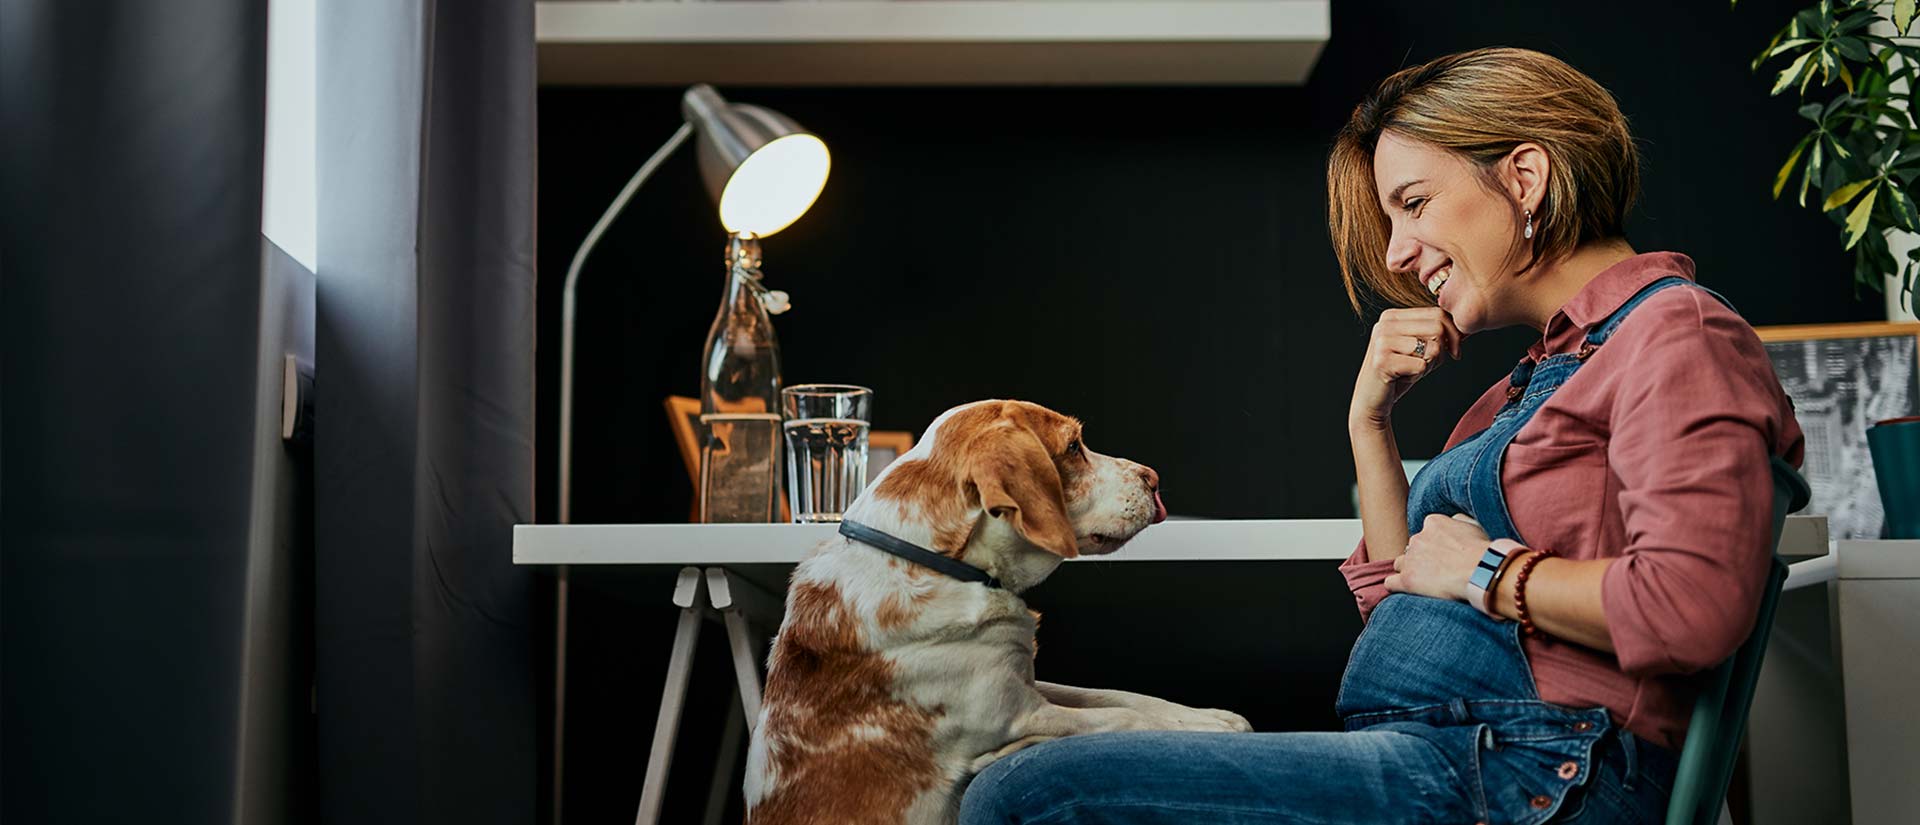 Pregnant woman smiling at her pet beagle